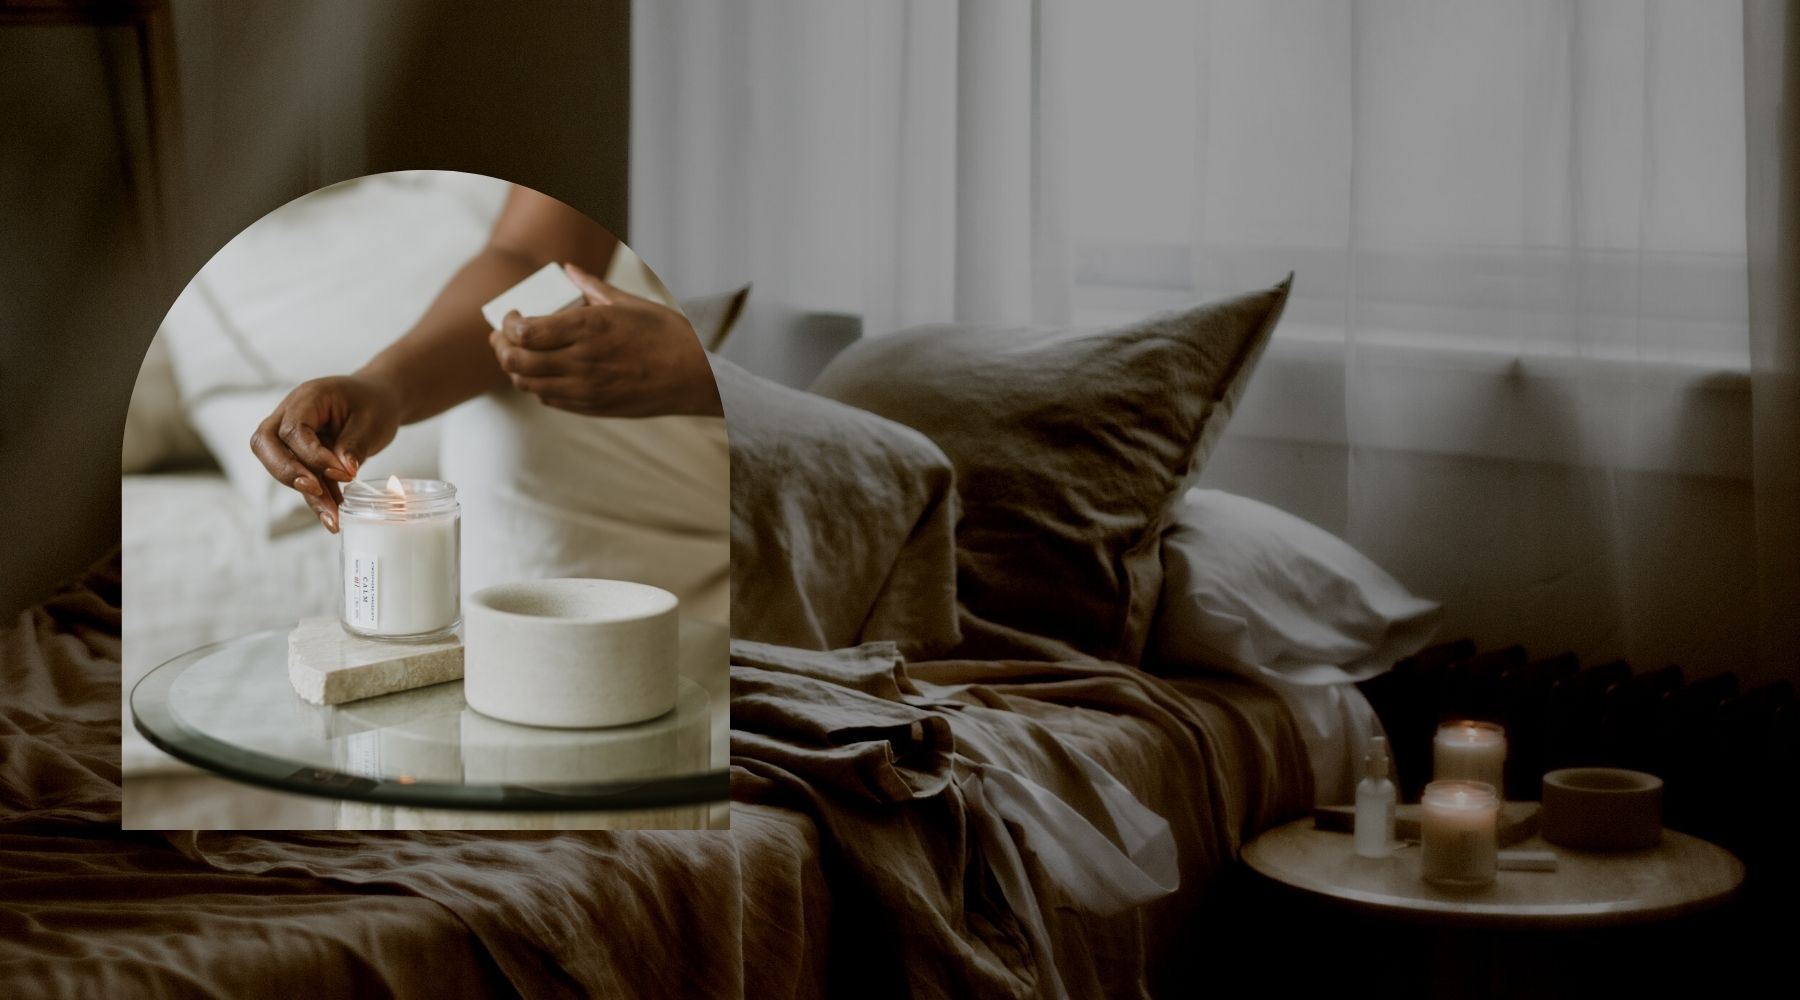 Woman is lighting an Atmosphere Threesixty Aromatherapy Candle on her side table, and there are additional candles lit beside her bed.